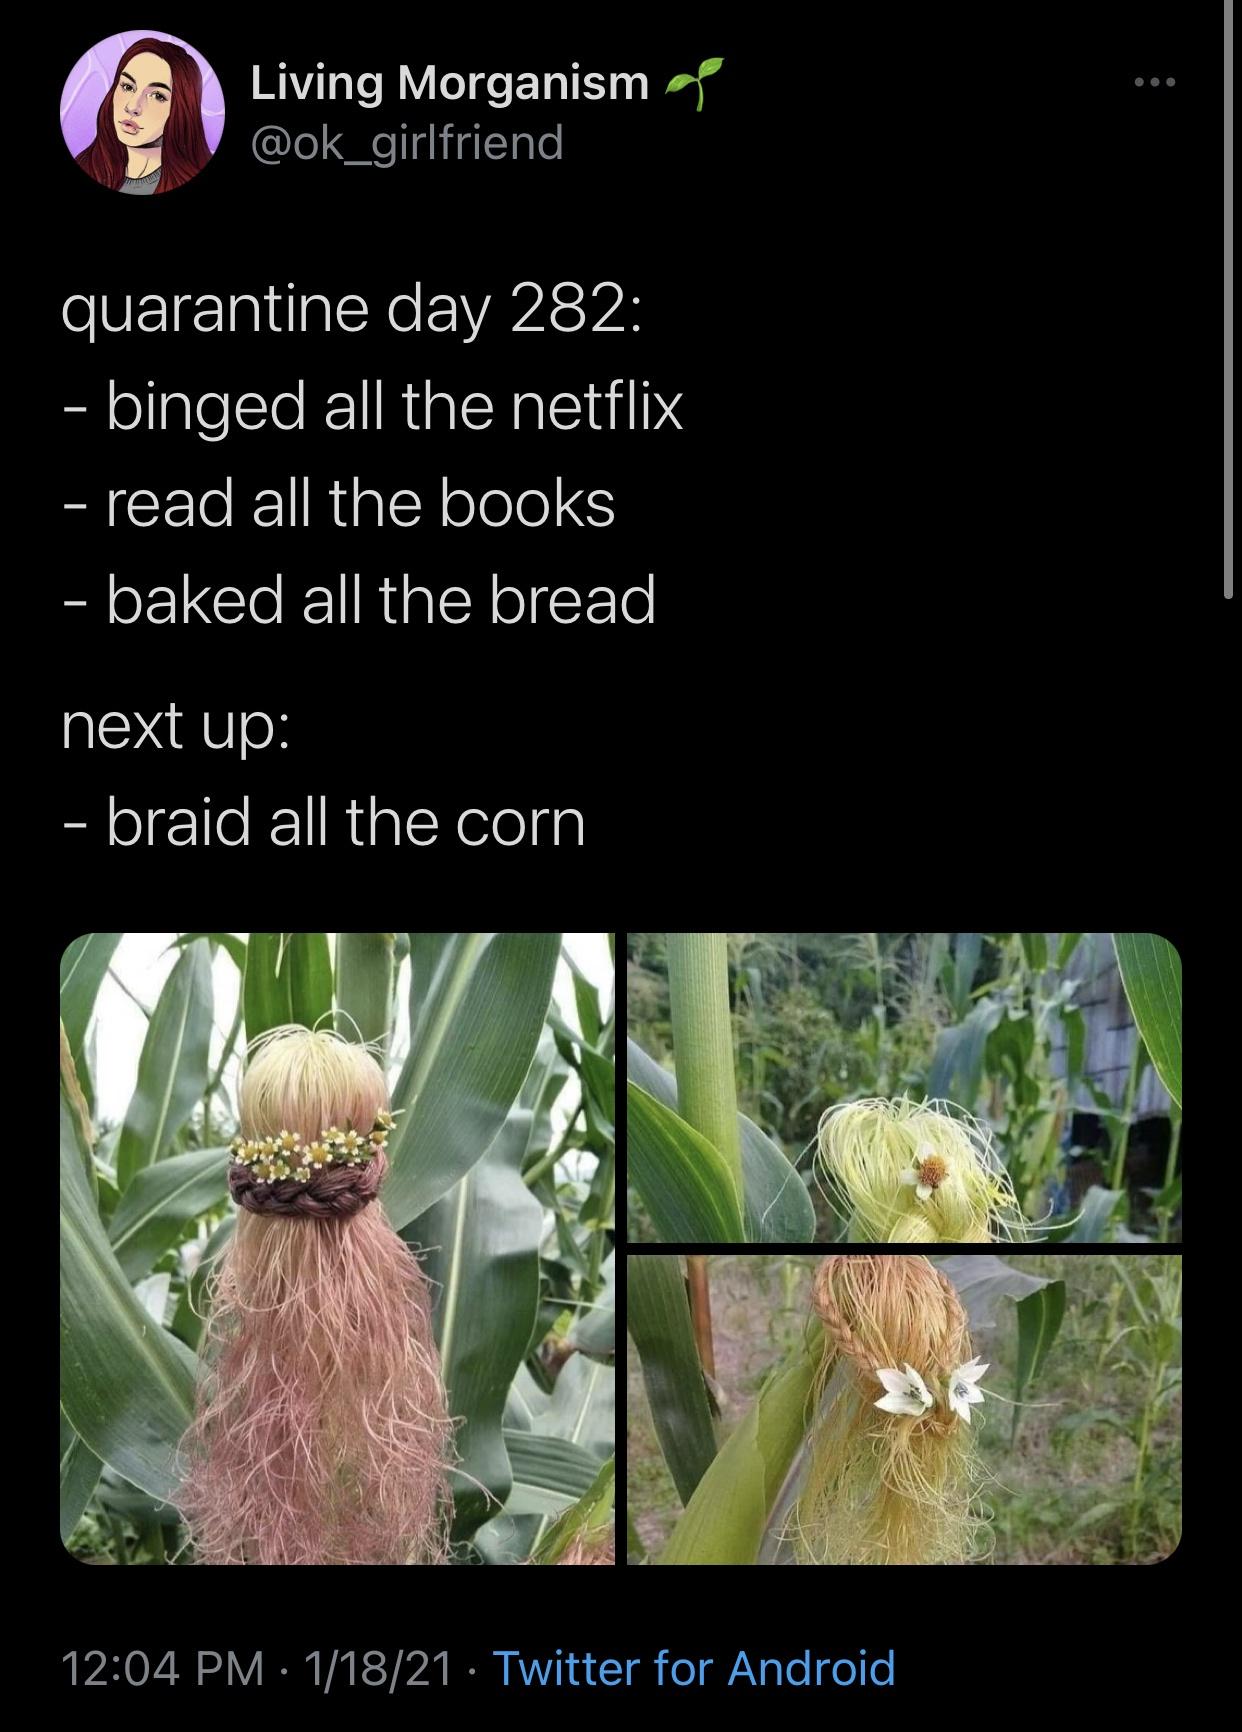 flora - Living Morganismo quarantine day 282 binged all the netflix read all the books baked all the bread next up braid all the corn 11821 Twitter for Android